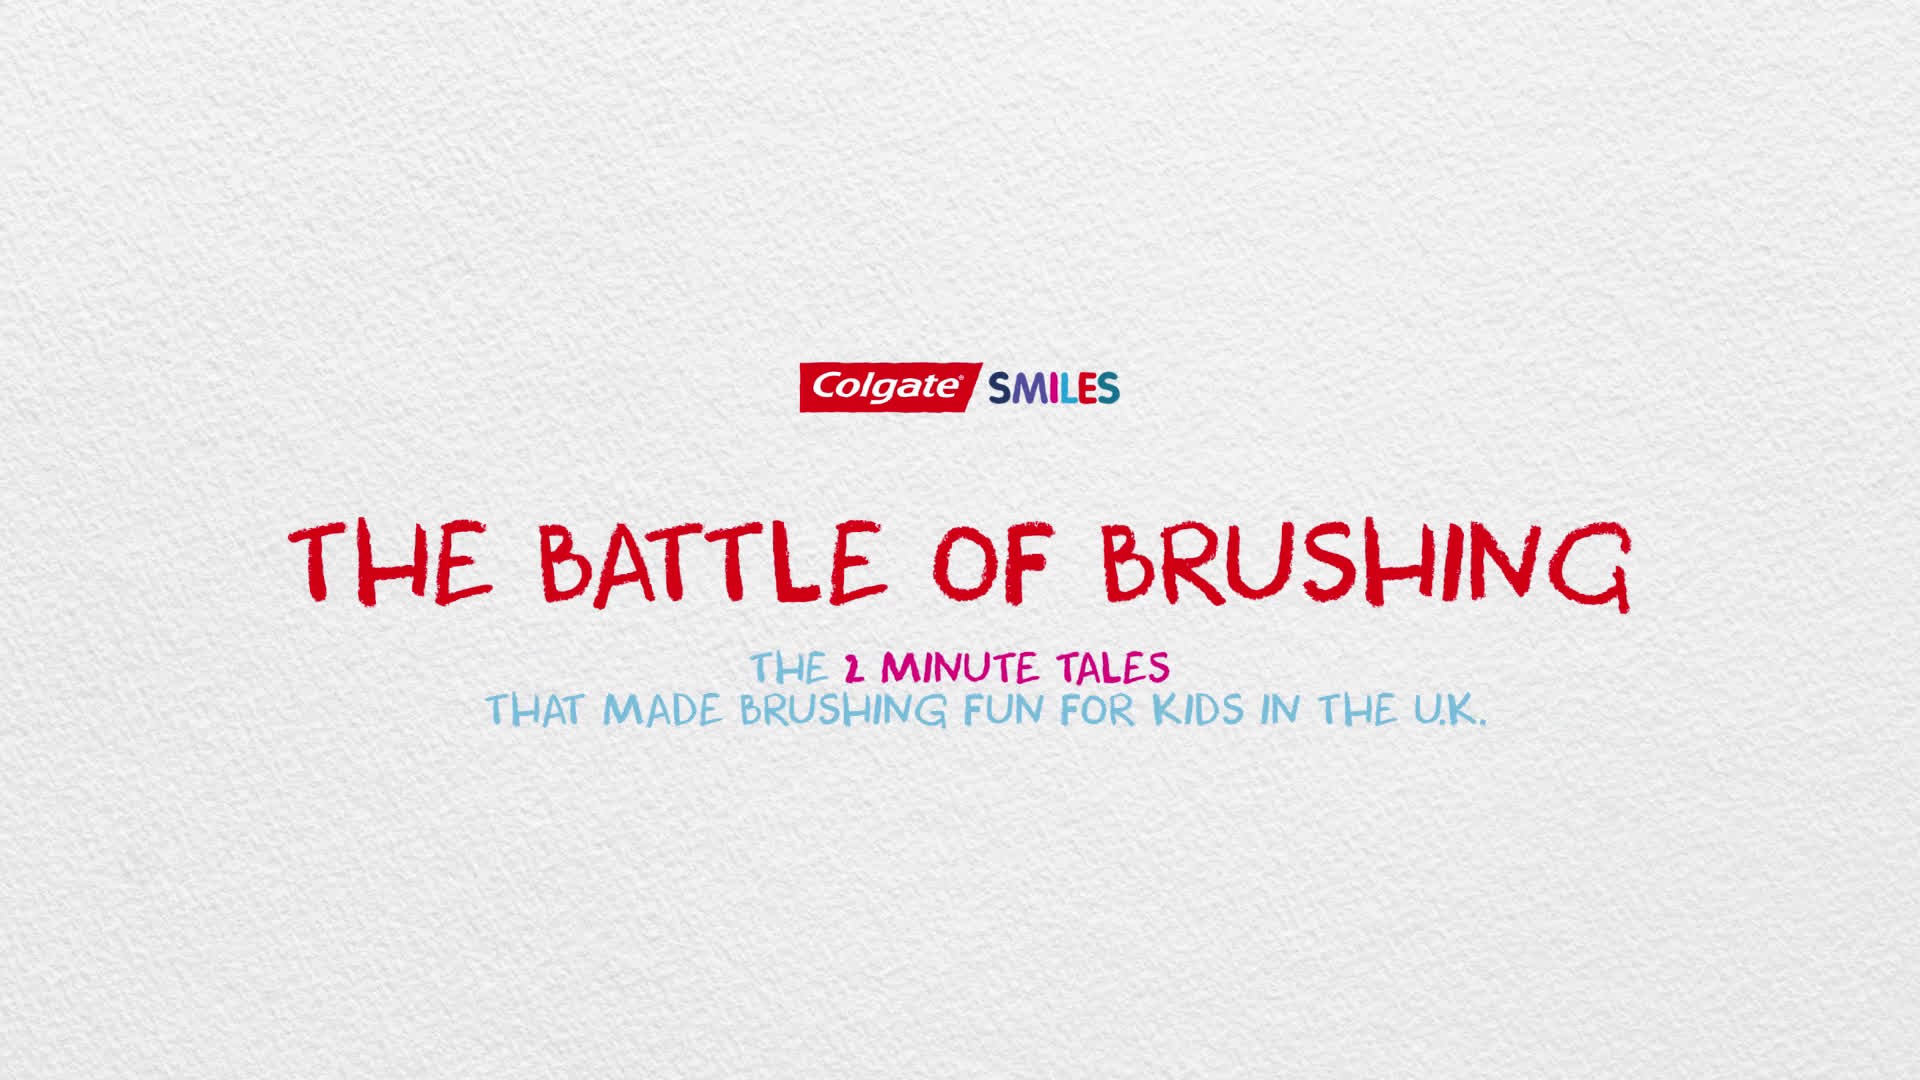 COLGATE SMILES "TWO MINUTE TALES"